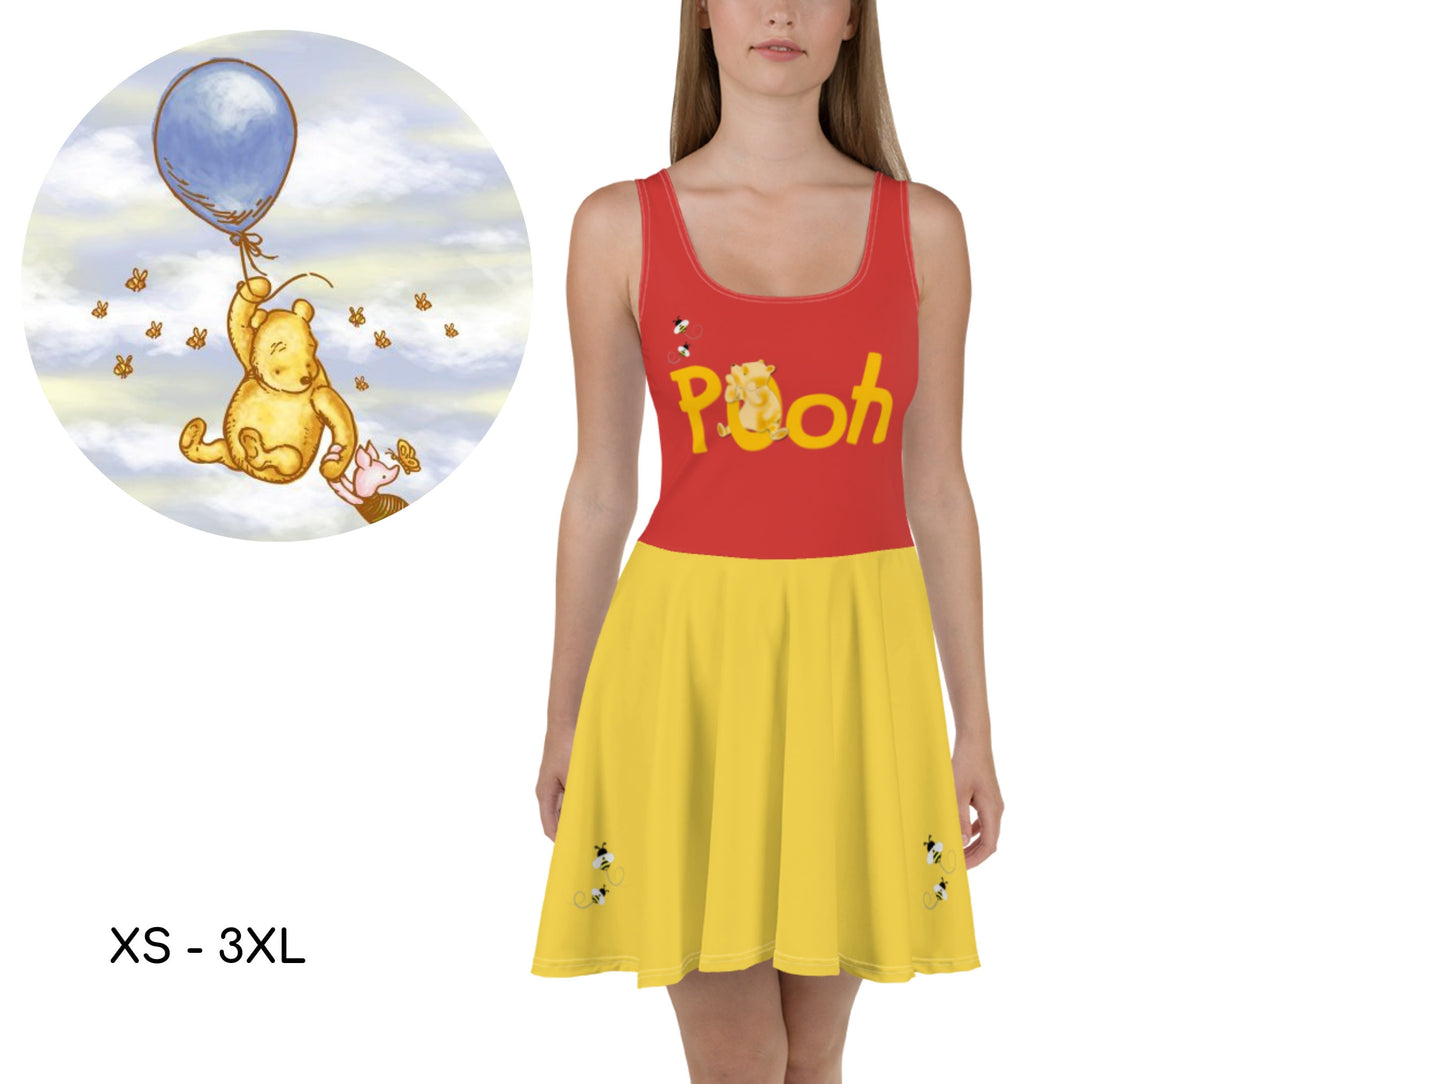 Winnie the Pooh Skater Dress, Classic Winnie the Pooh, Gift for Her, Halloween Adult Costume, Cosplay, Harajuku, Birthday Gift, Vintage Pooh